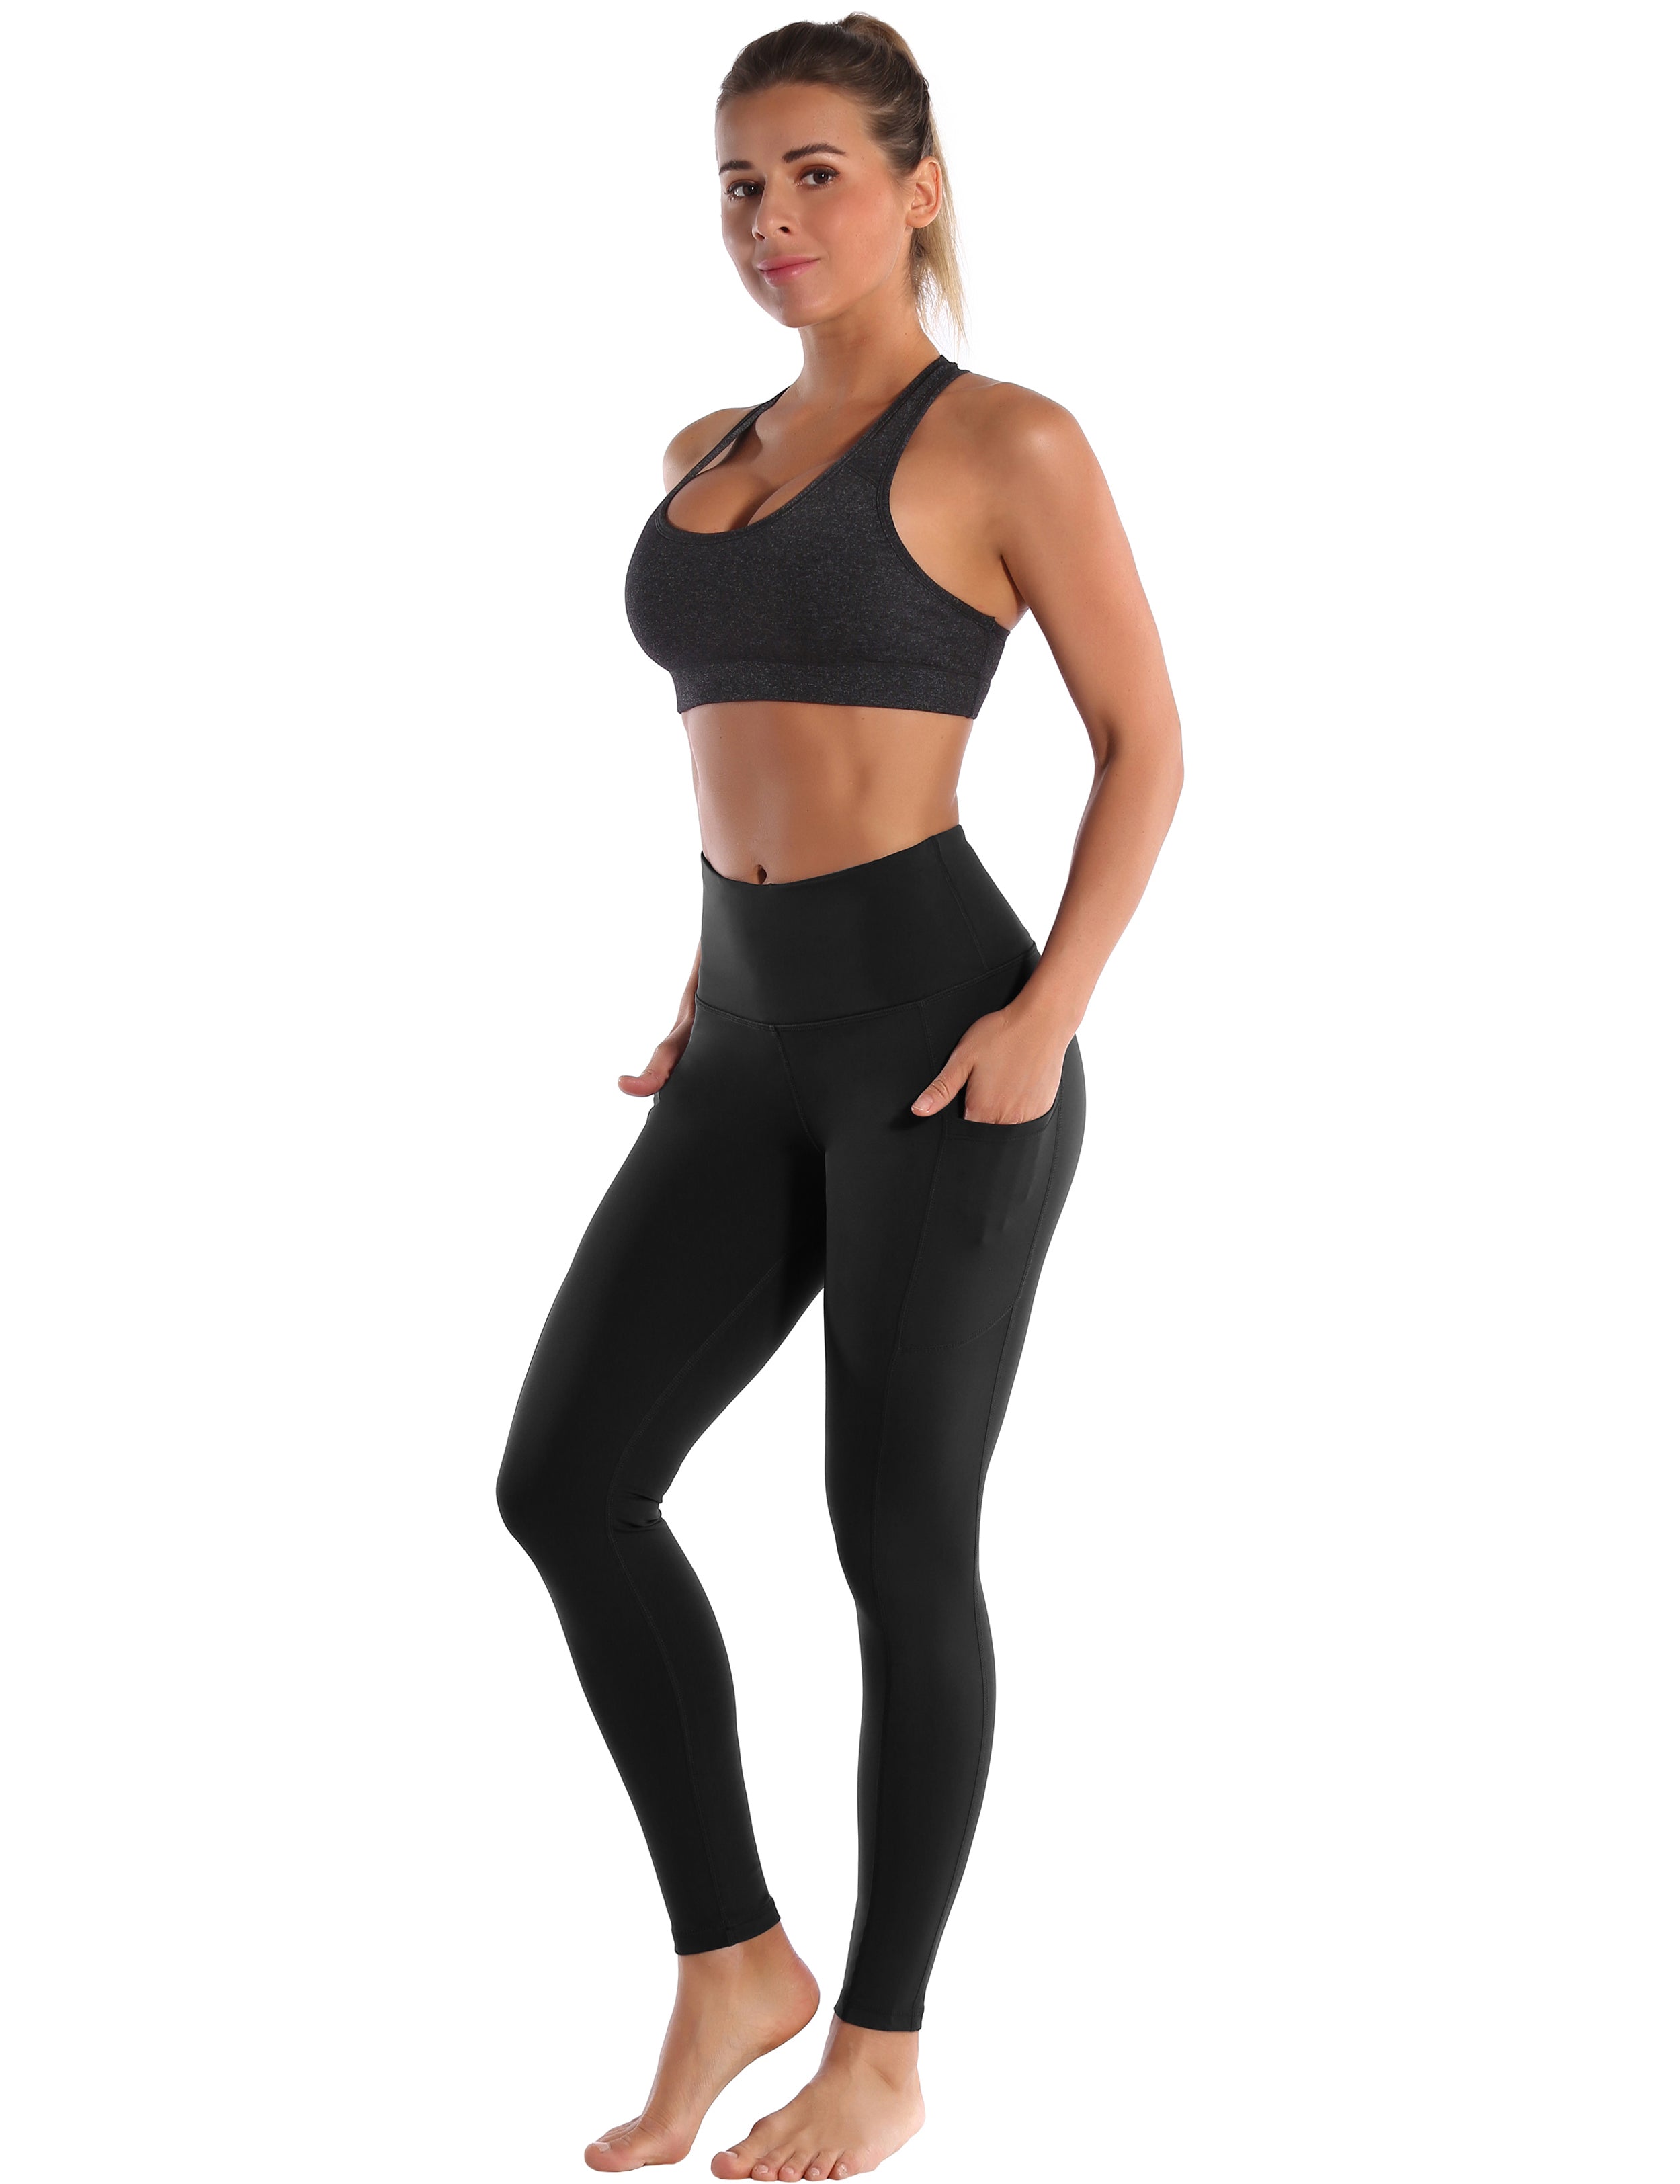 Hip Line Side Pockets Pilates Pants black Sexy Hip Line Side Pockets 75%Nylon/25%Spandex Fabric doesn't attract lint easily 4-way stretch No see-through Moisture-wicking Tummy control Inner pocket Two lengths